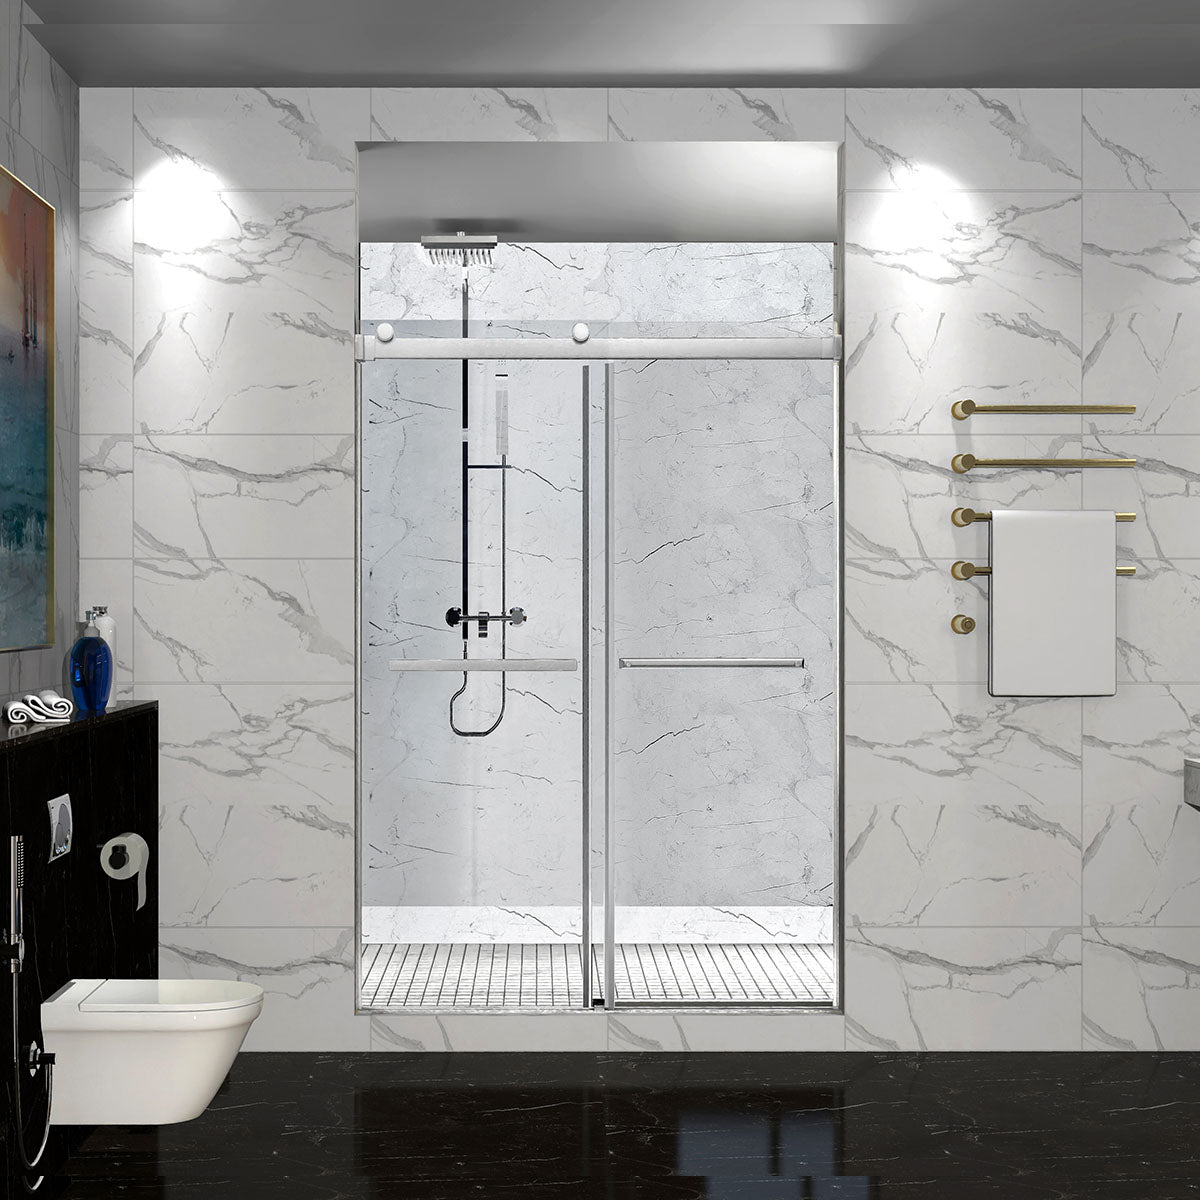 54" DQZ Nicholas Series Frameless Bypass Shower Door with Klearteck Treatment  (3/8" Thickness) (Brushed Nickel)